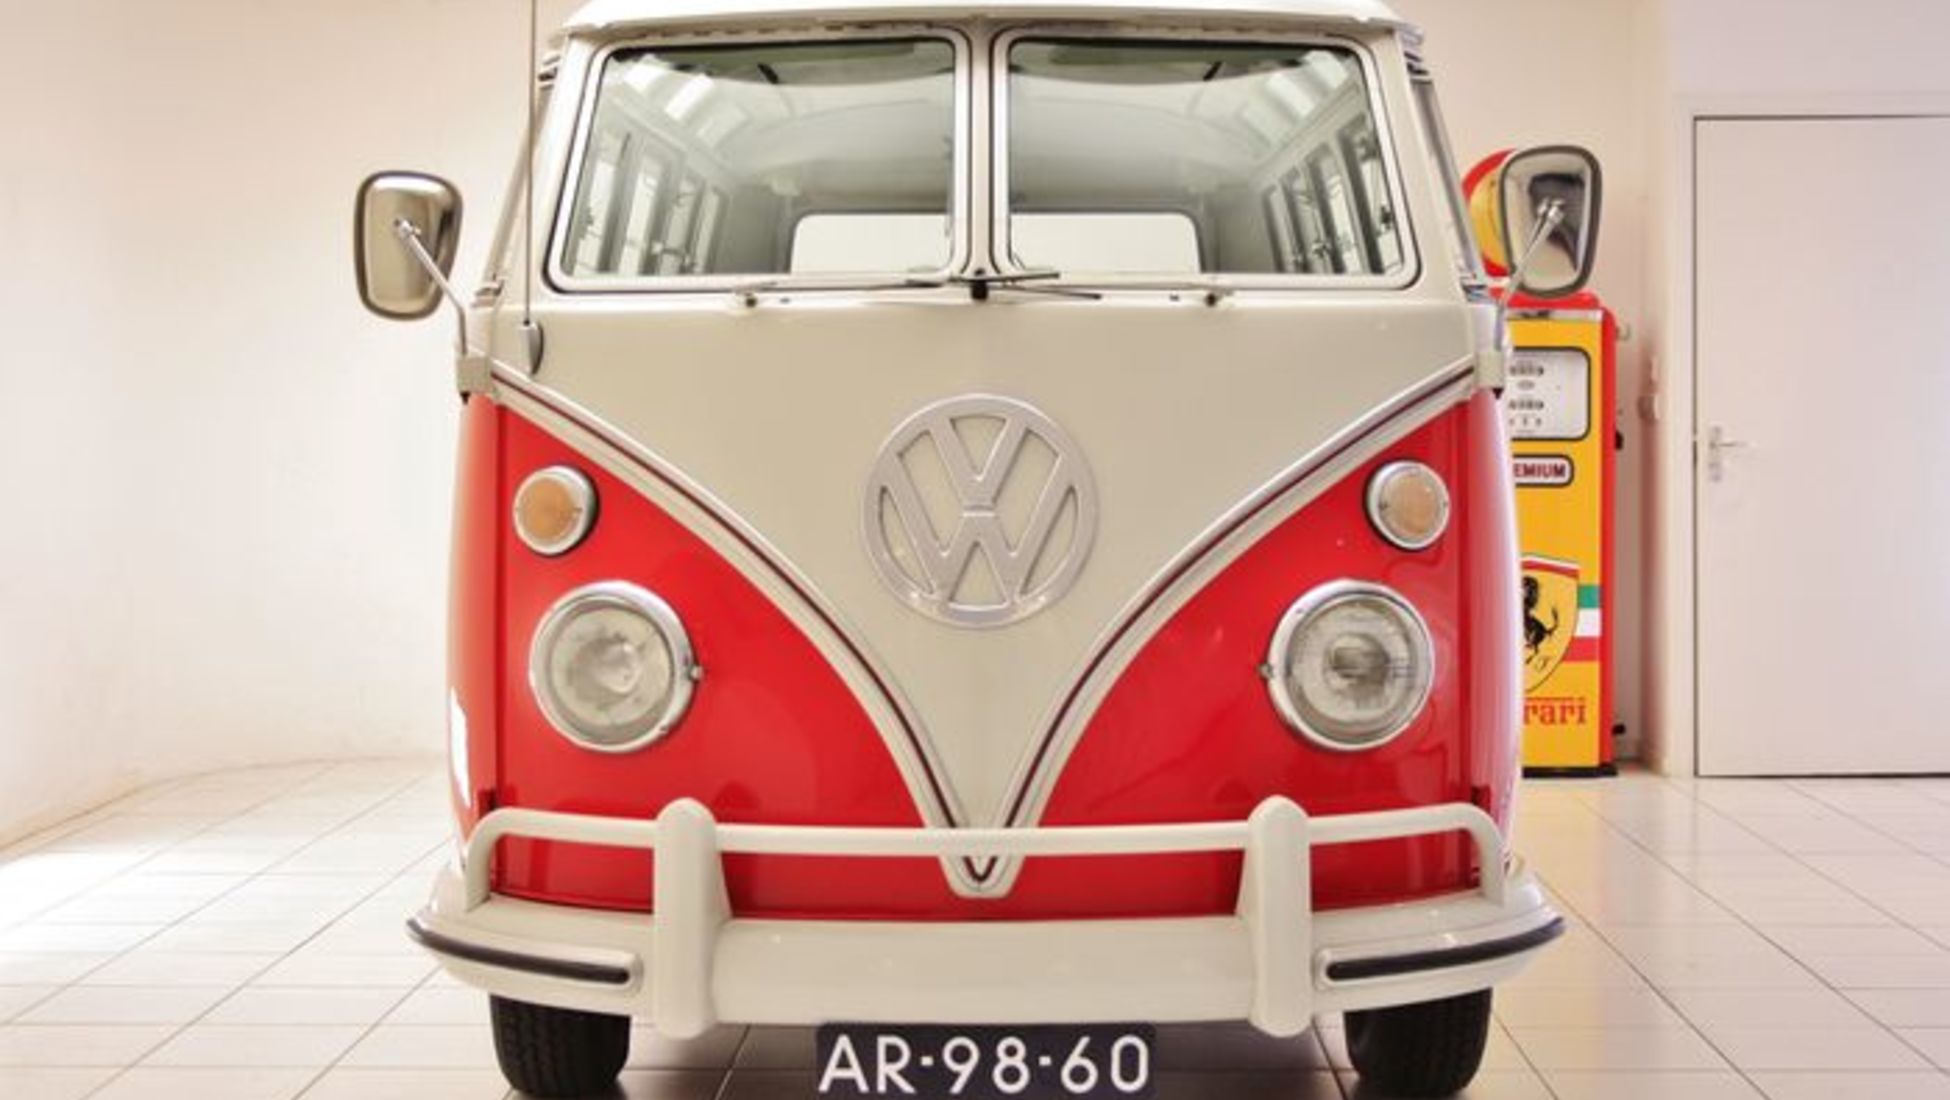 Geestig voering overal A short history of the Volkswagen T1 - Catawiki